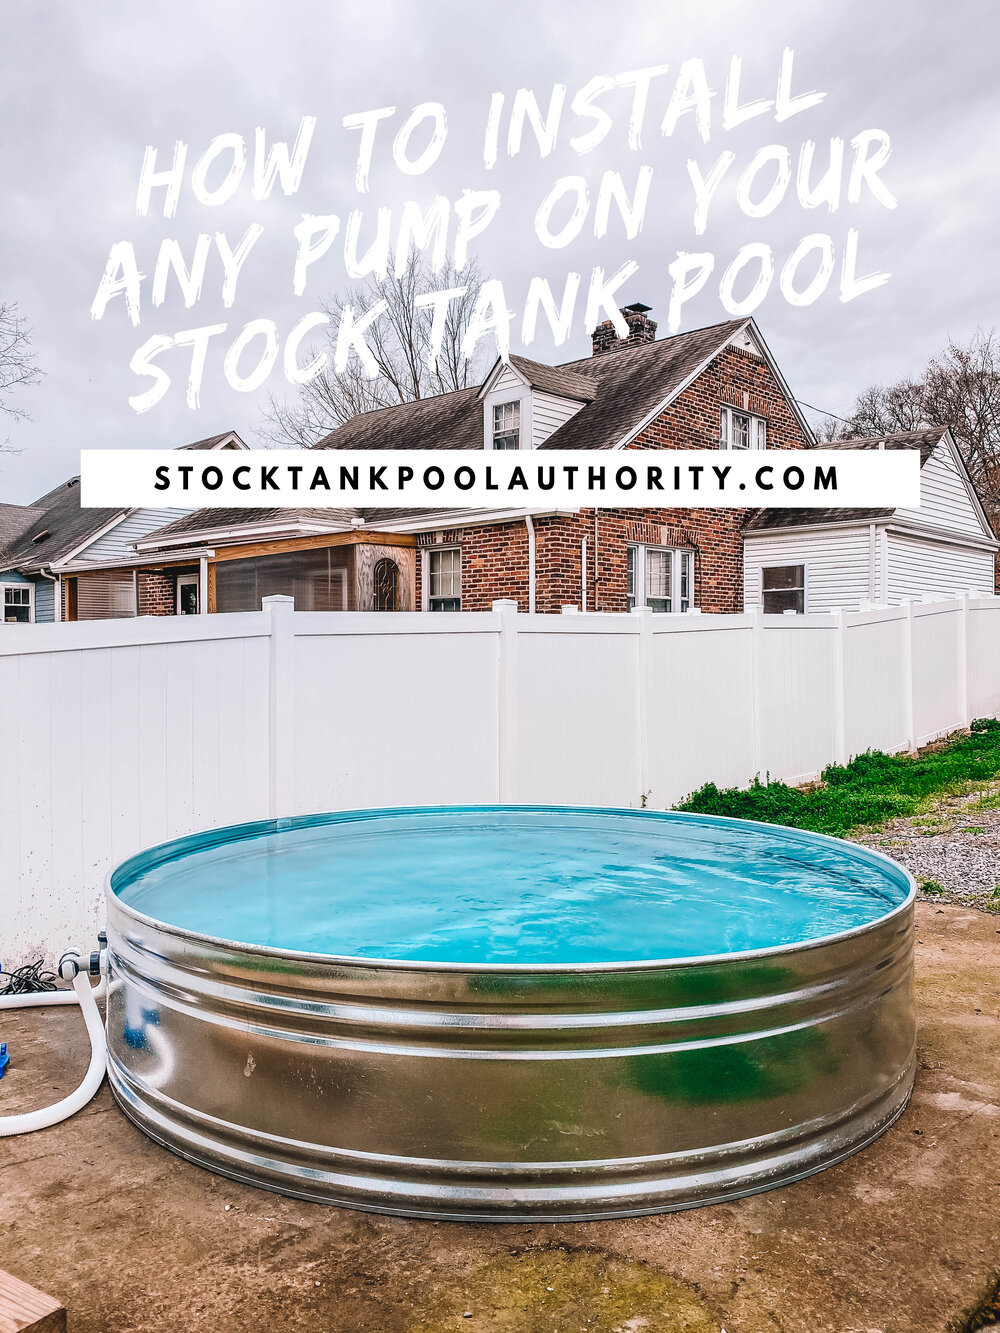 How To Install Any Pump Stock Tank Pool Authority.jpg